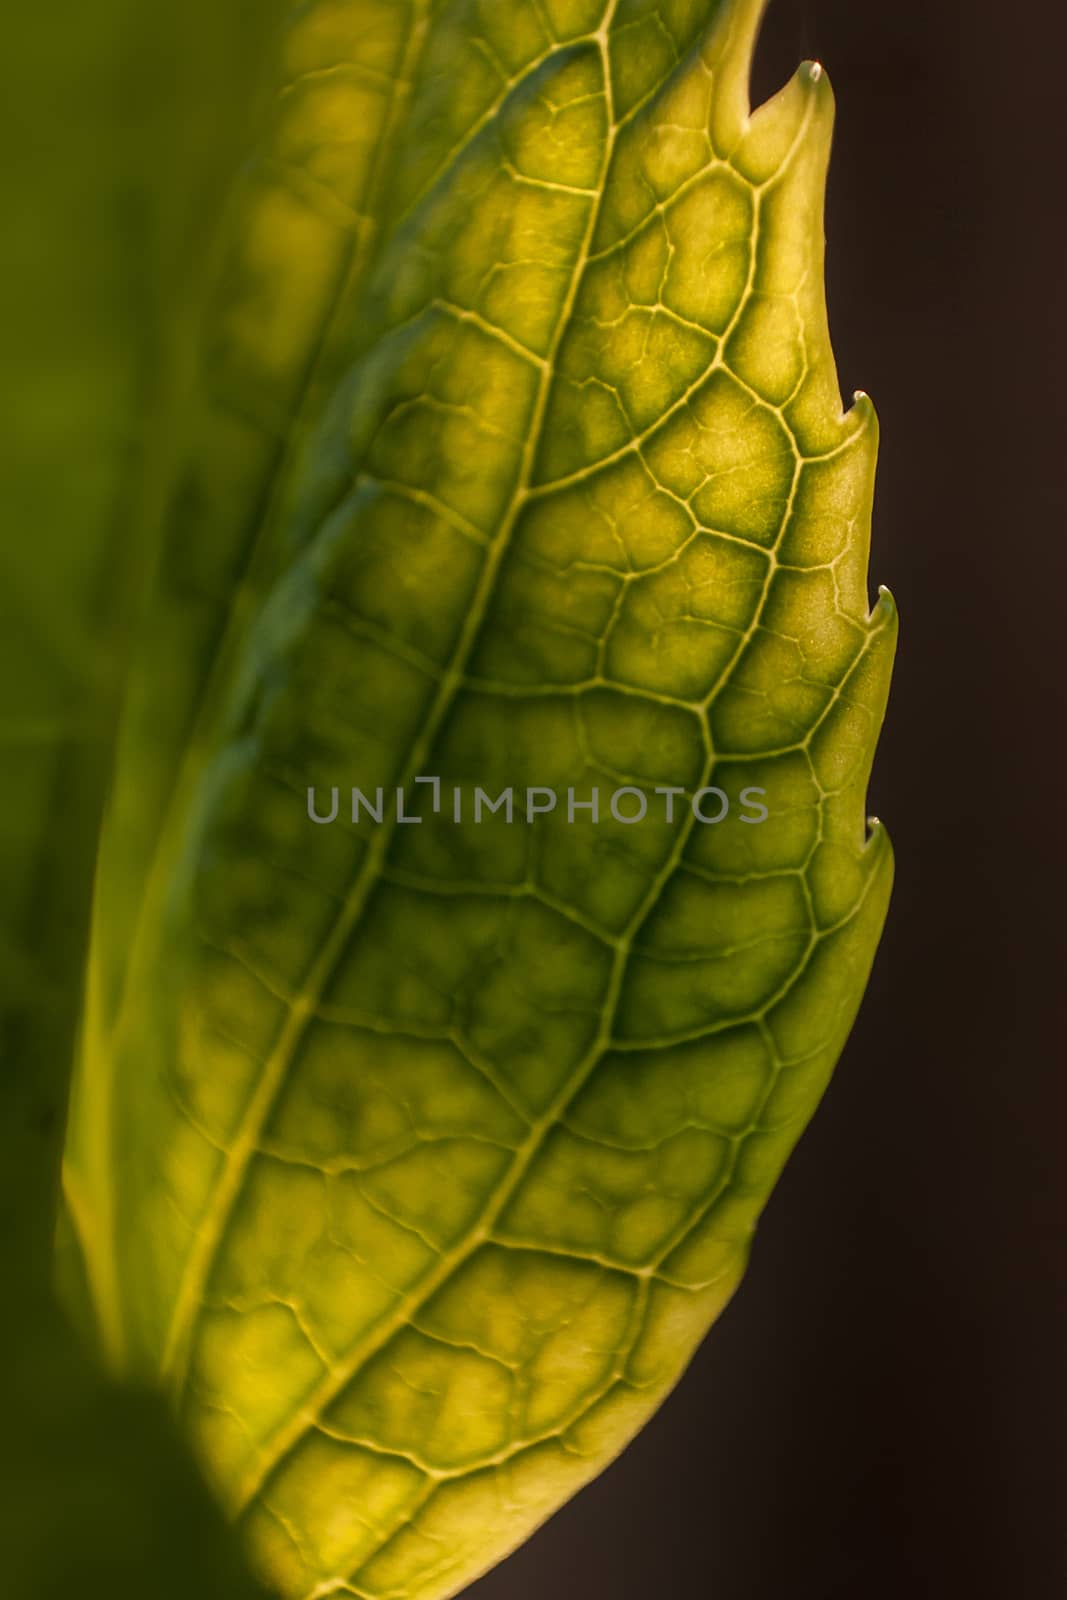 Profile of a serrated leaf by pippocarlot